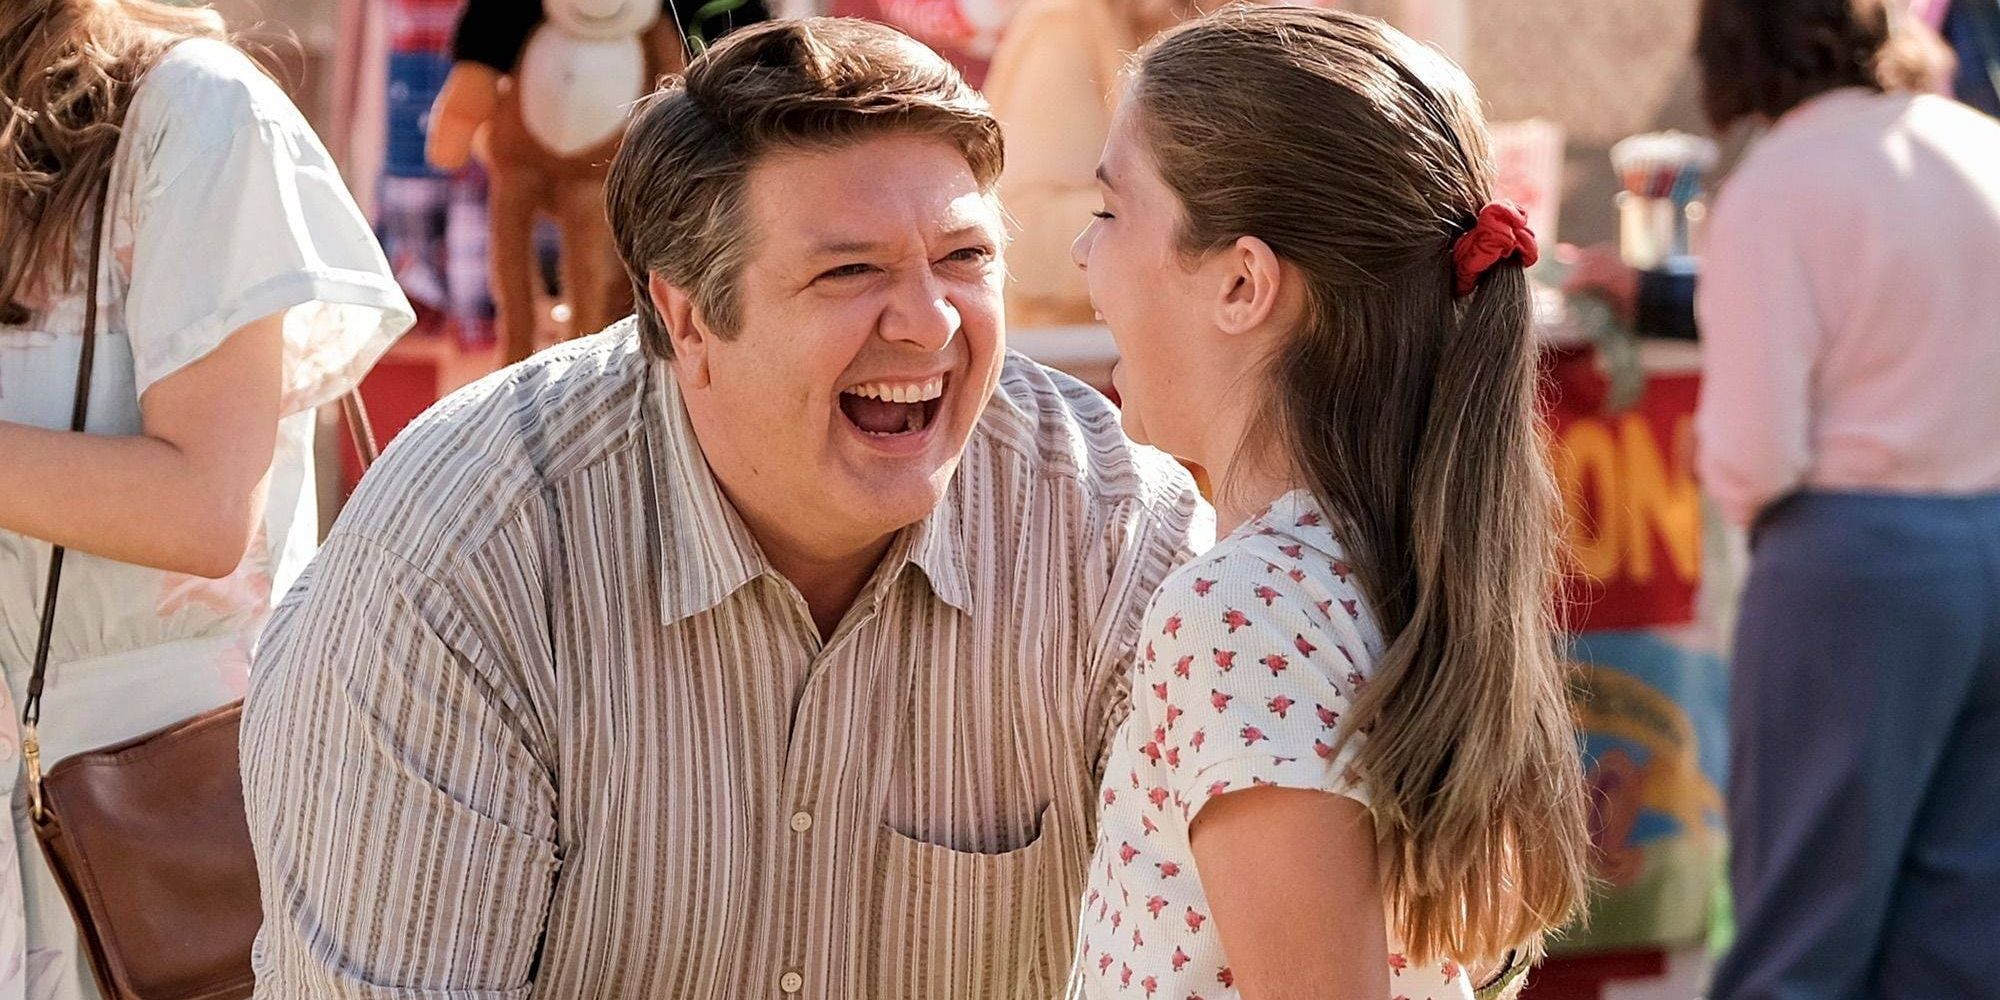 George laughing with Missy at the carnival in Young Sheldon